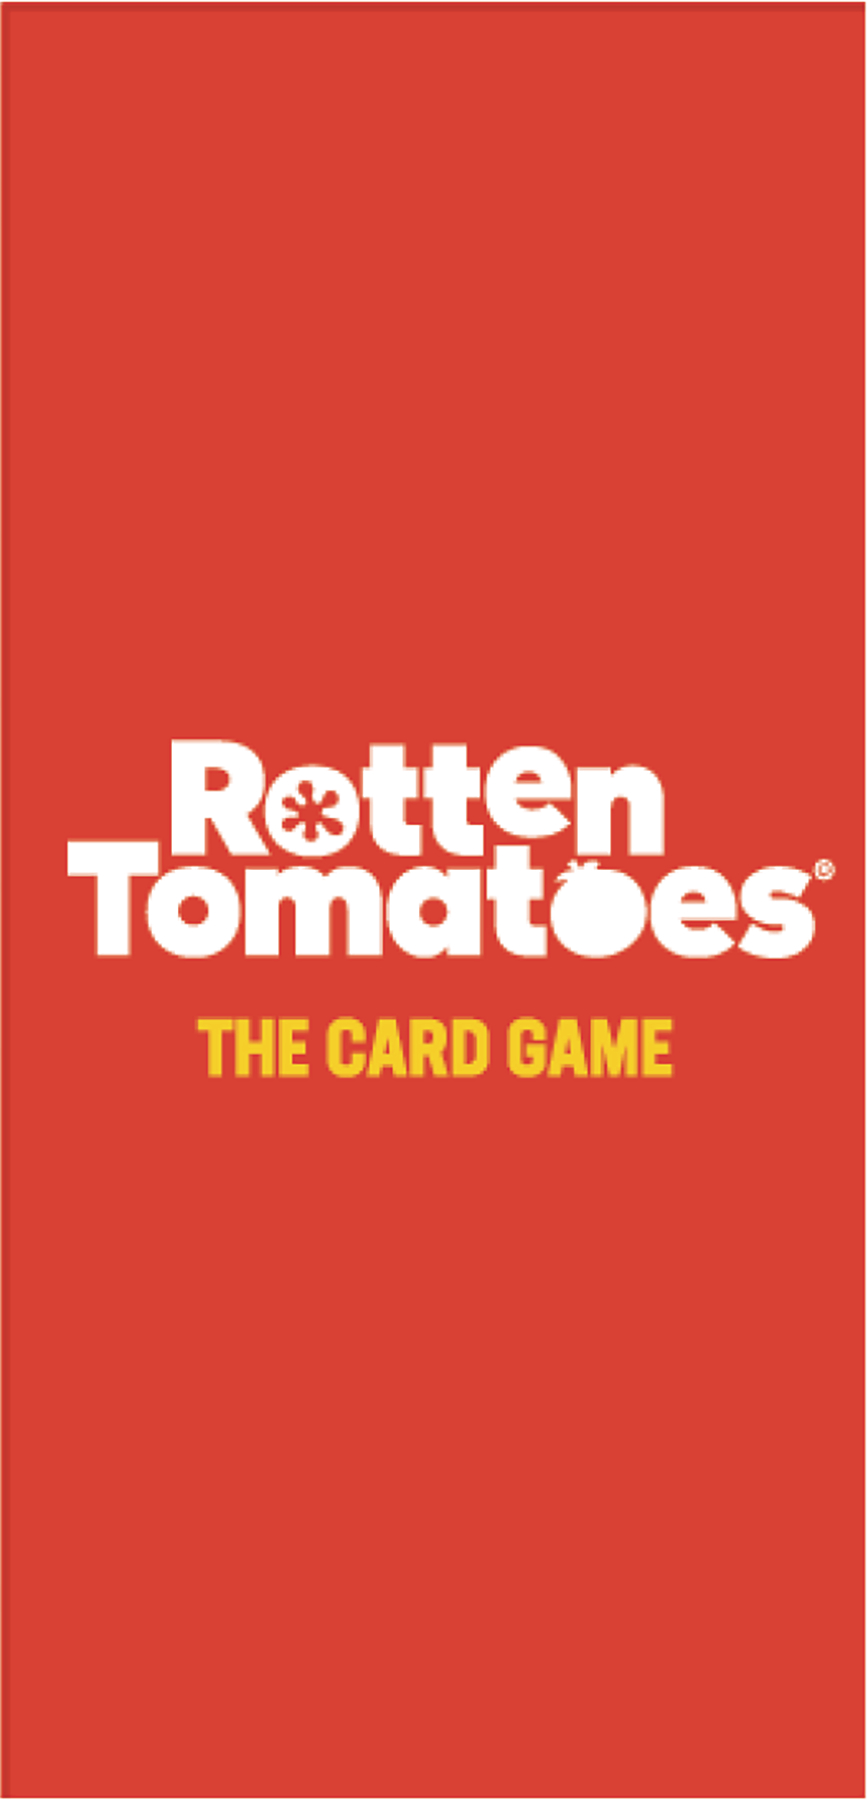 Rotten Tomatoes Card Game